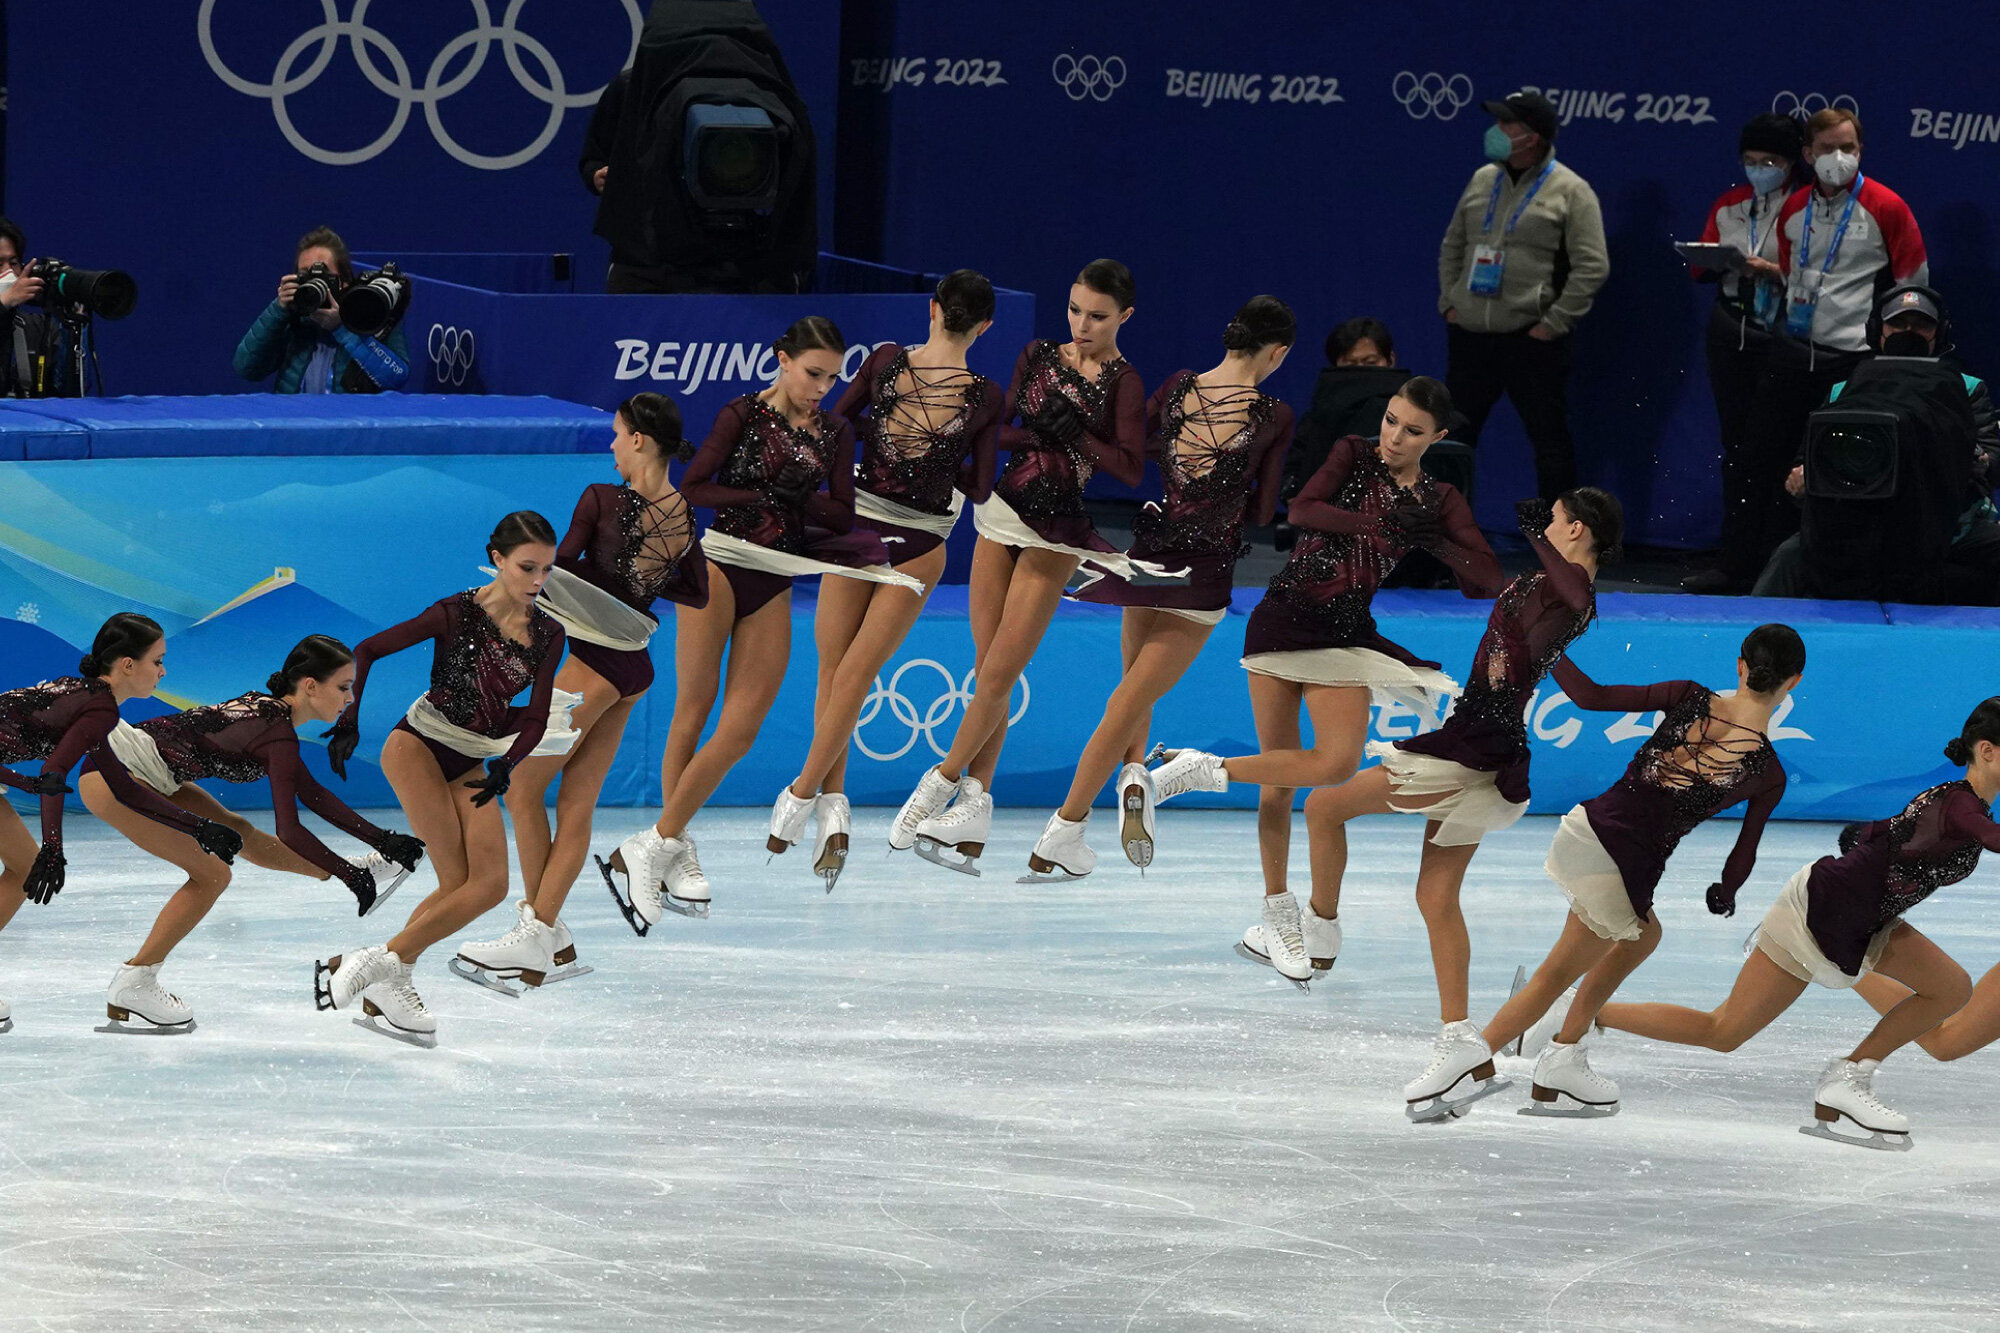 Single Skating: Anna Shcherbakova performs a quadruple jump at the 2022 Beijing Winter Olympic Games. 2000x1340 HD Background.